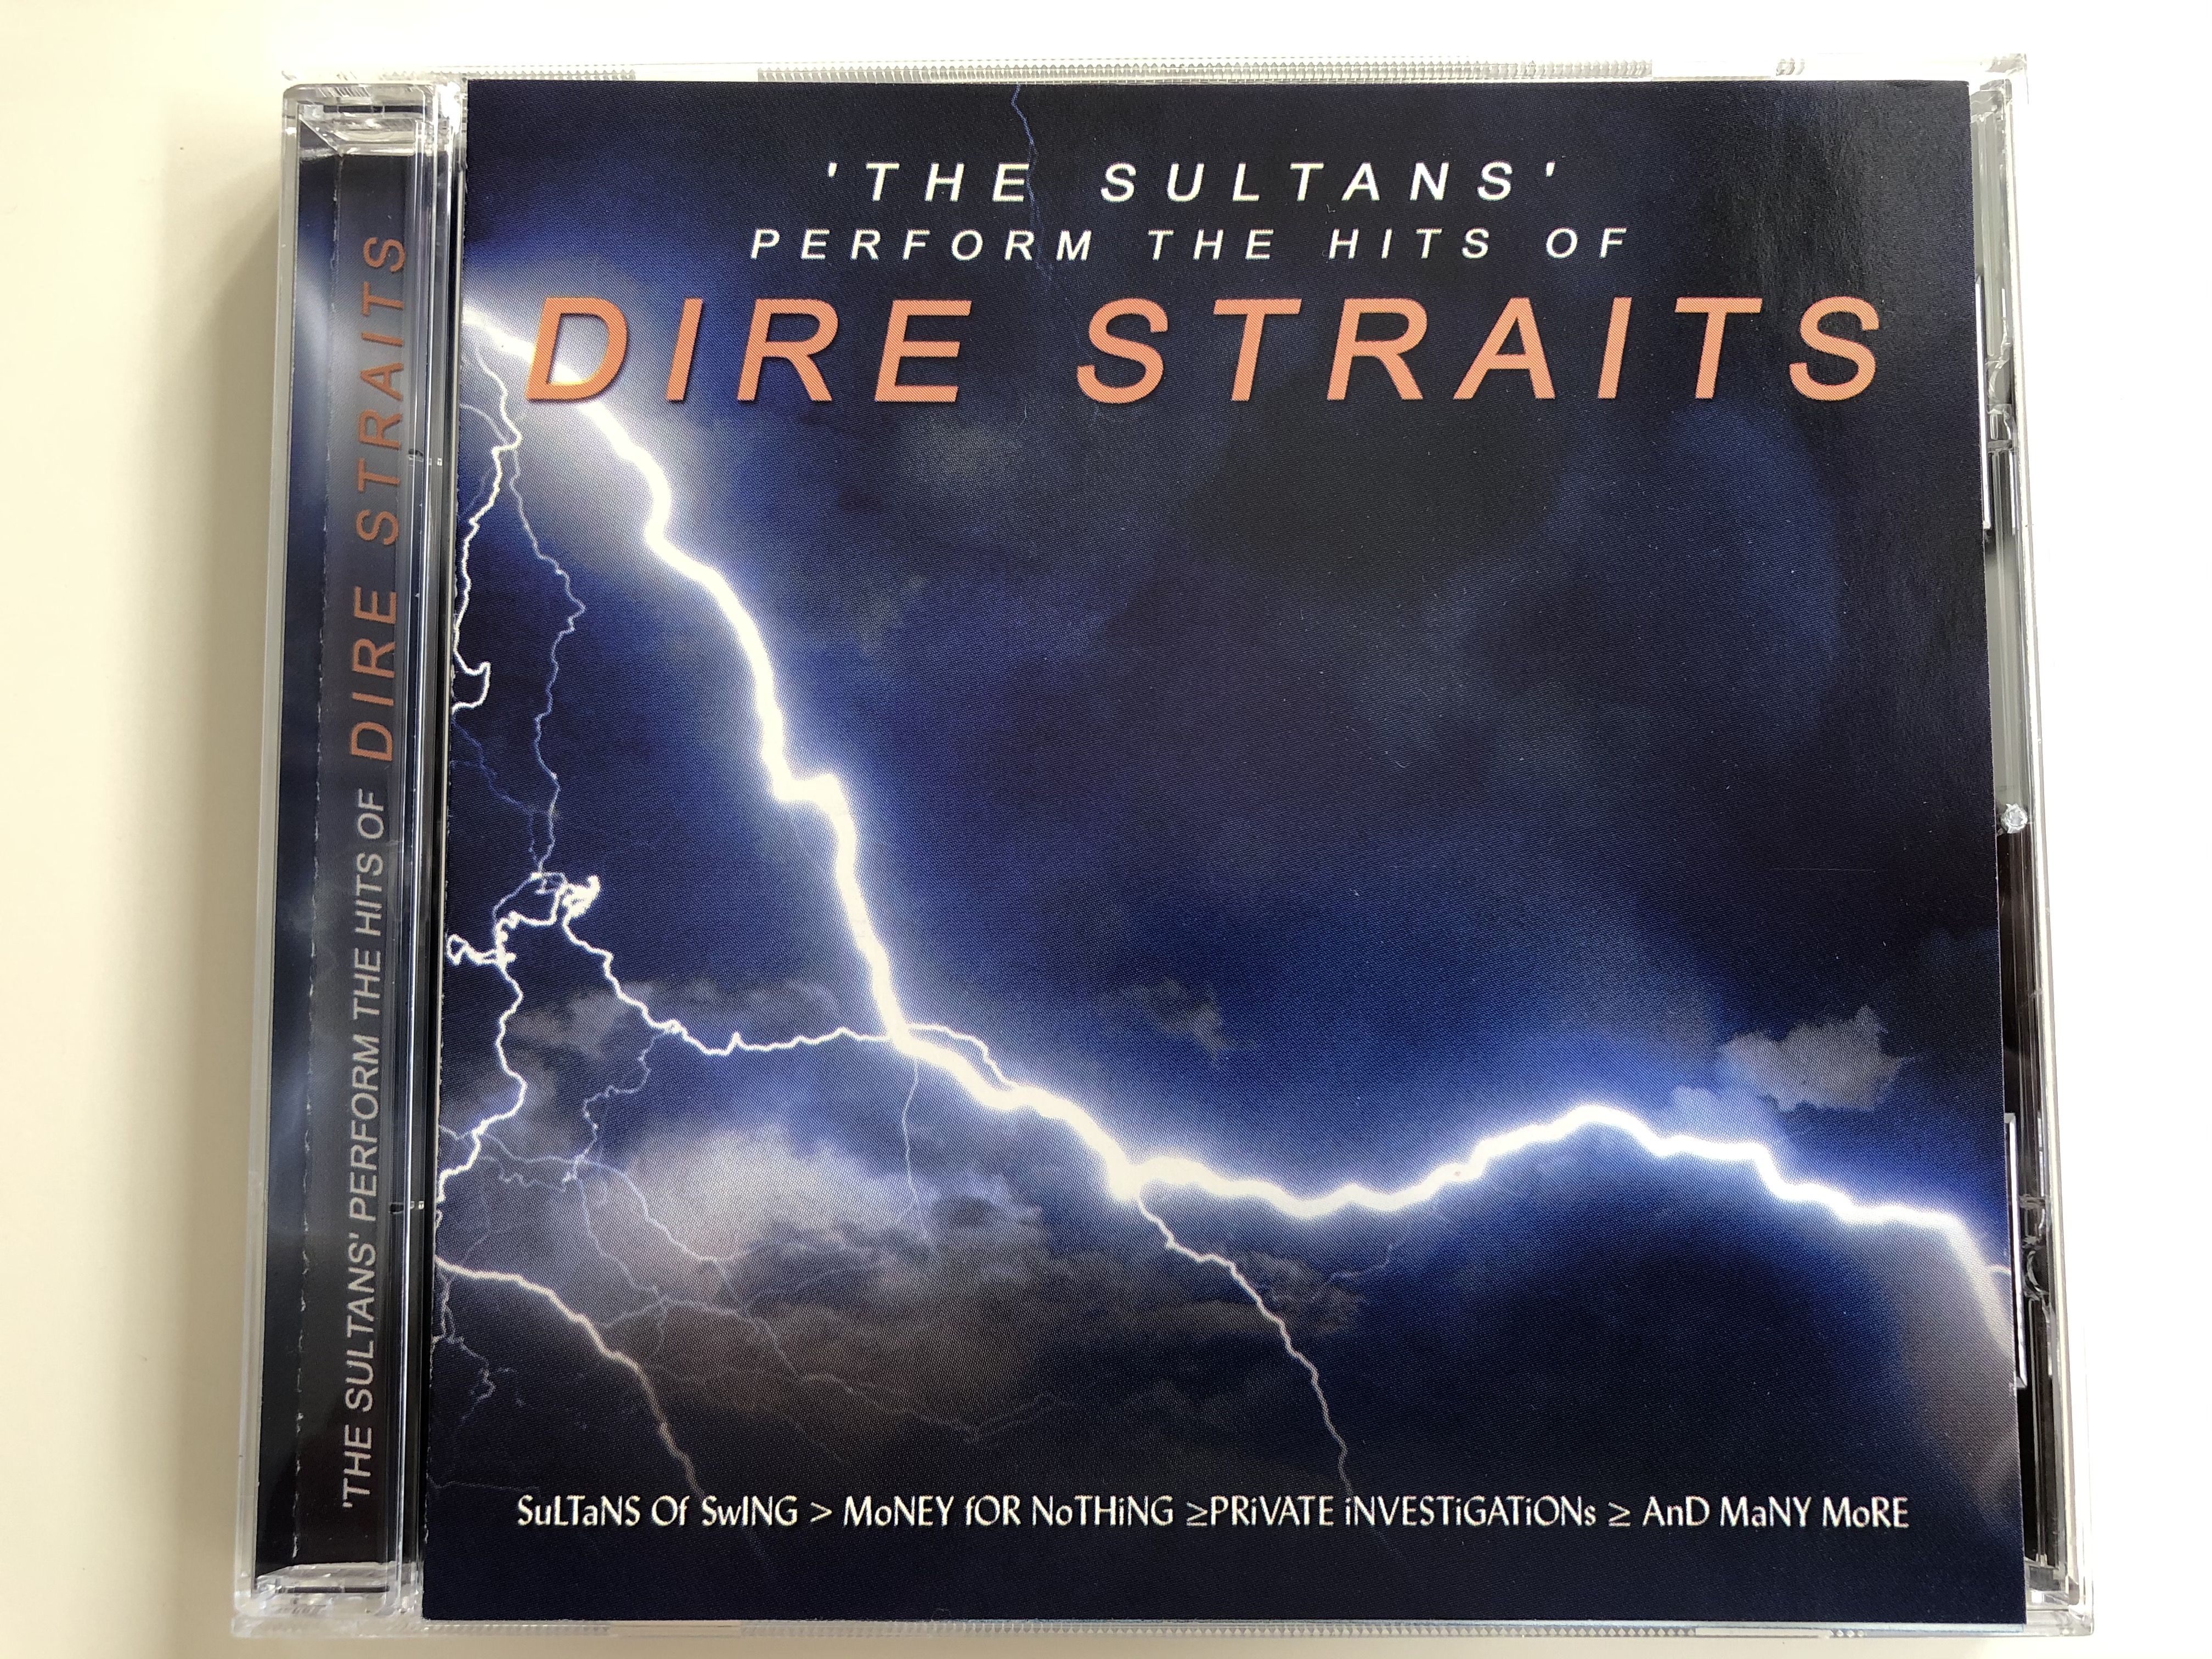 -the-sultans-perform-the-hits-of-dire-straits-sultans-of-swing-money-for-nothing-private-investigations-and-many-more-time-music-international-ltd.-audio-cd-2001-tmi192-1-.jpg